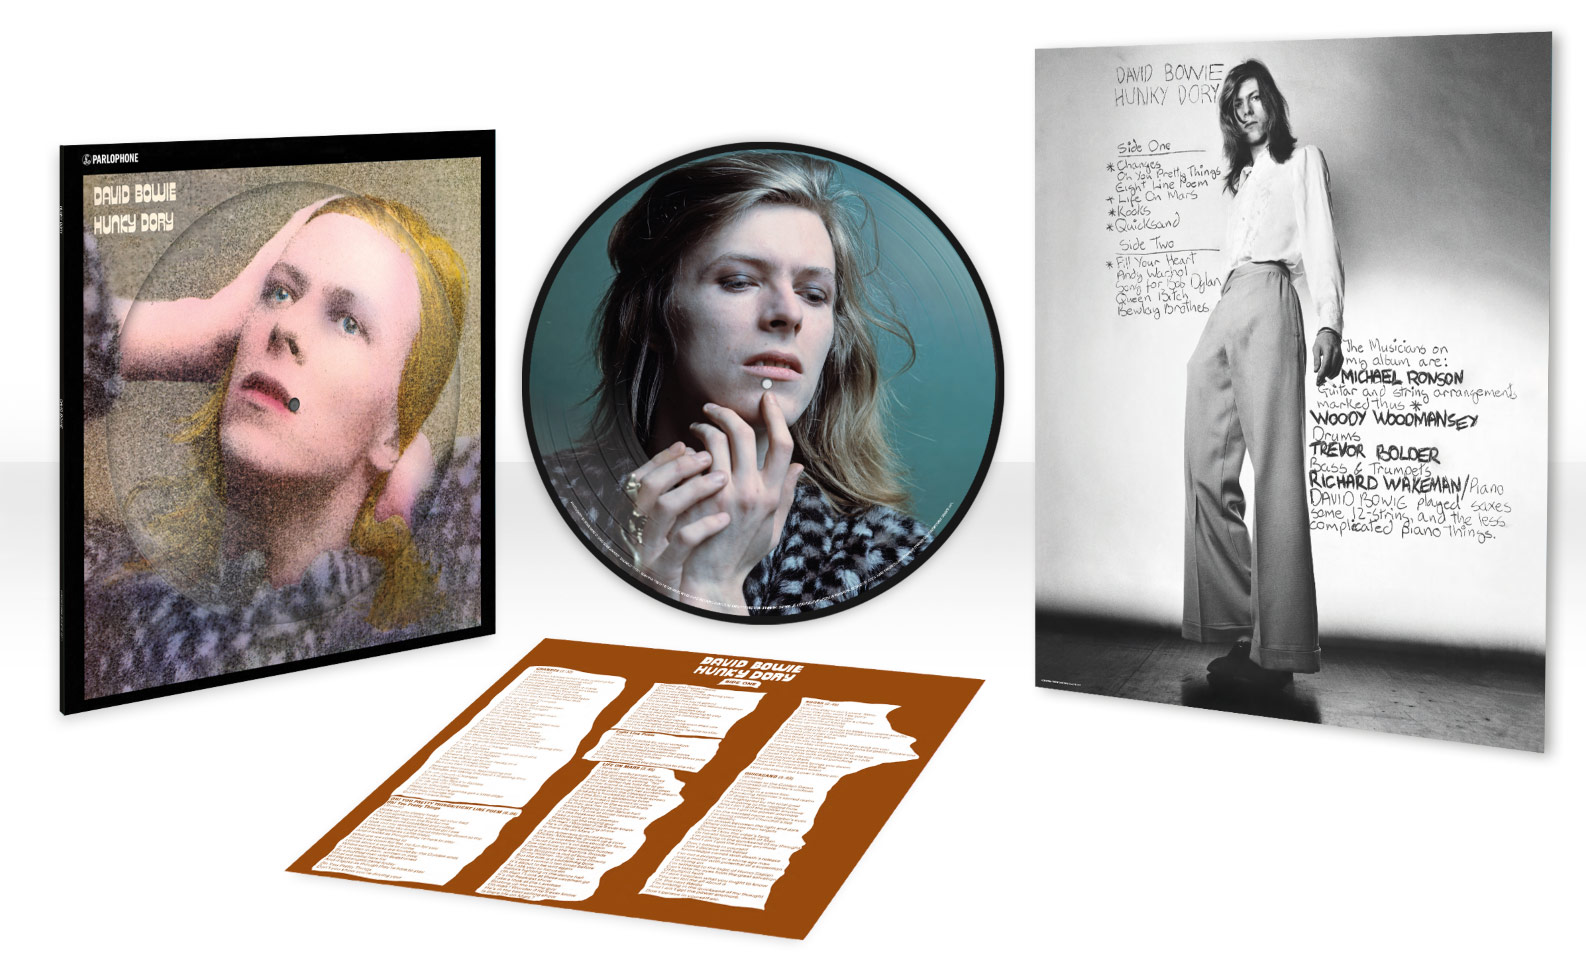 David Bowie / Hunky Dory 50th anniversary vinyl picture disc